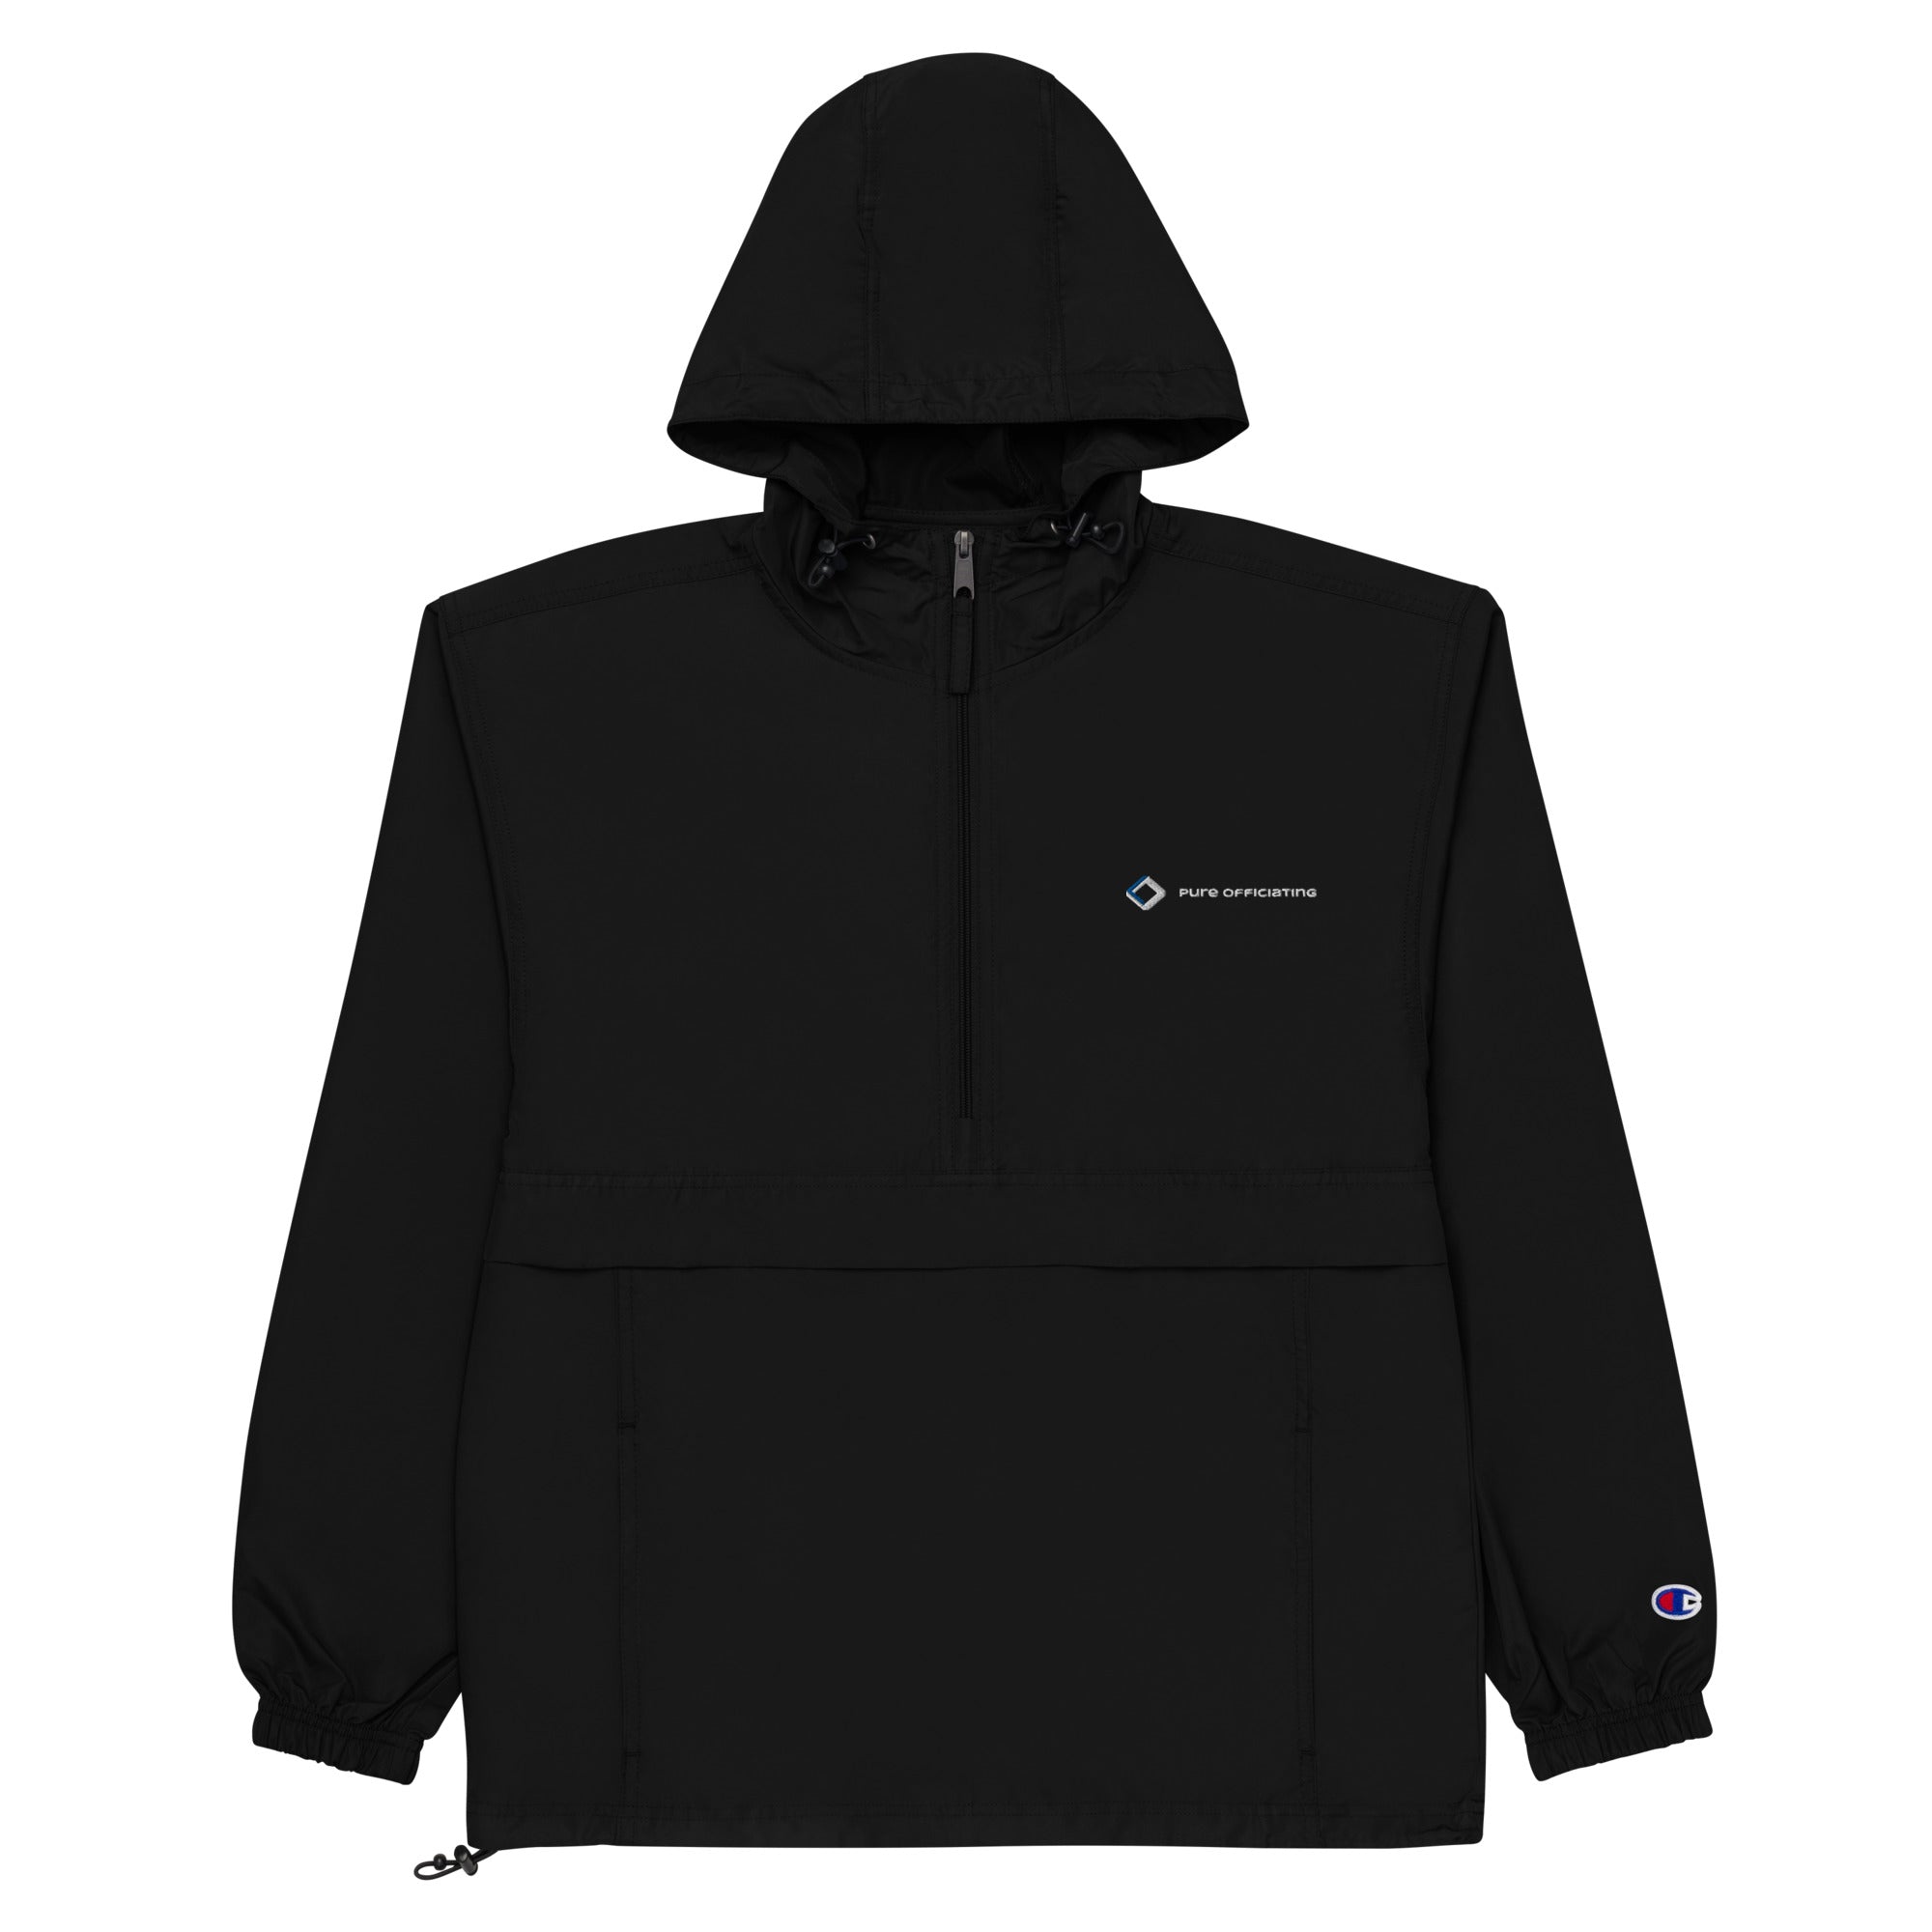 PURE OFFICIATING Embroidered Champion Packable Jacket